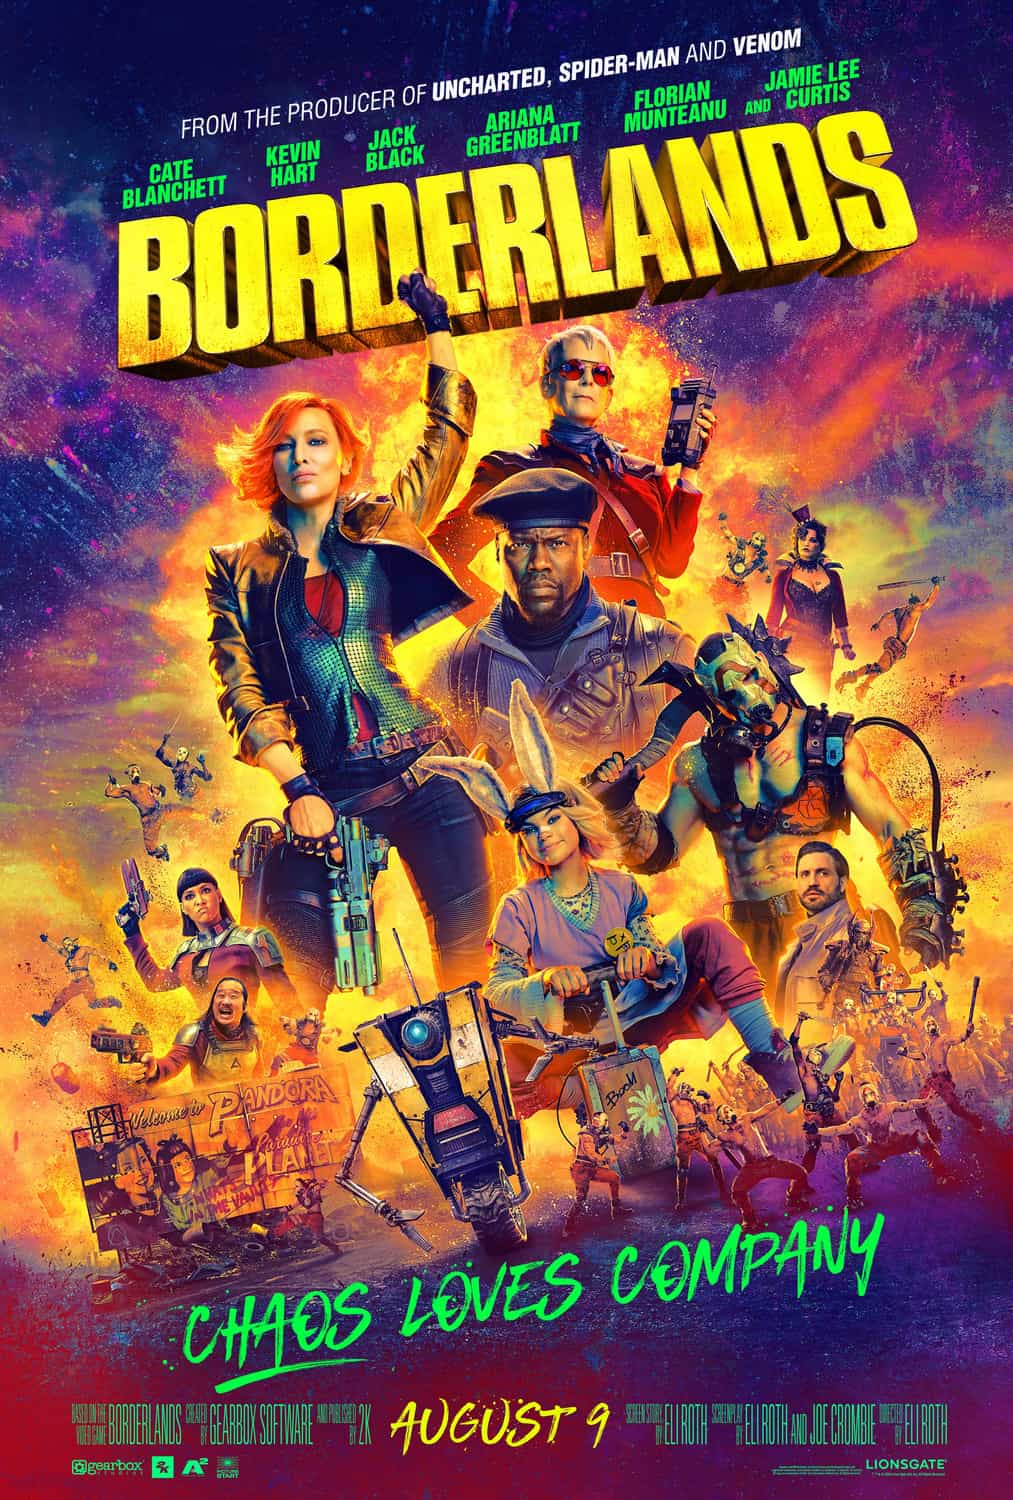 New poster has been released for Borderlands which stars Ariana Greenblatt and Jamie Lee Curtis, trailer dropping tomorrow - movie UK release date 9th August 2024 #borderlands